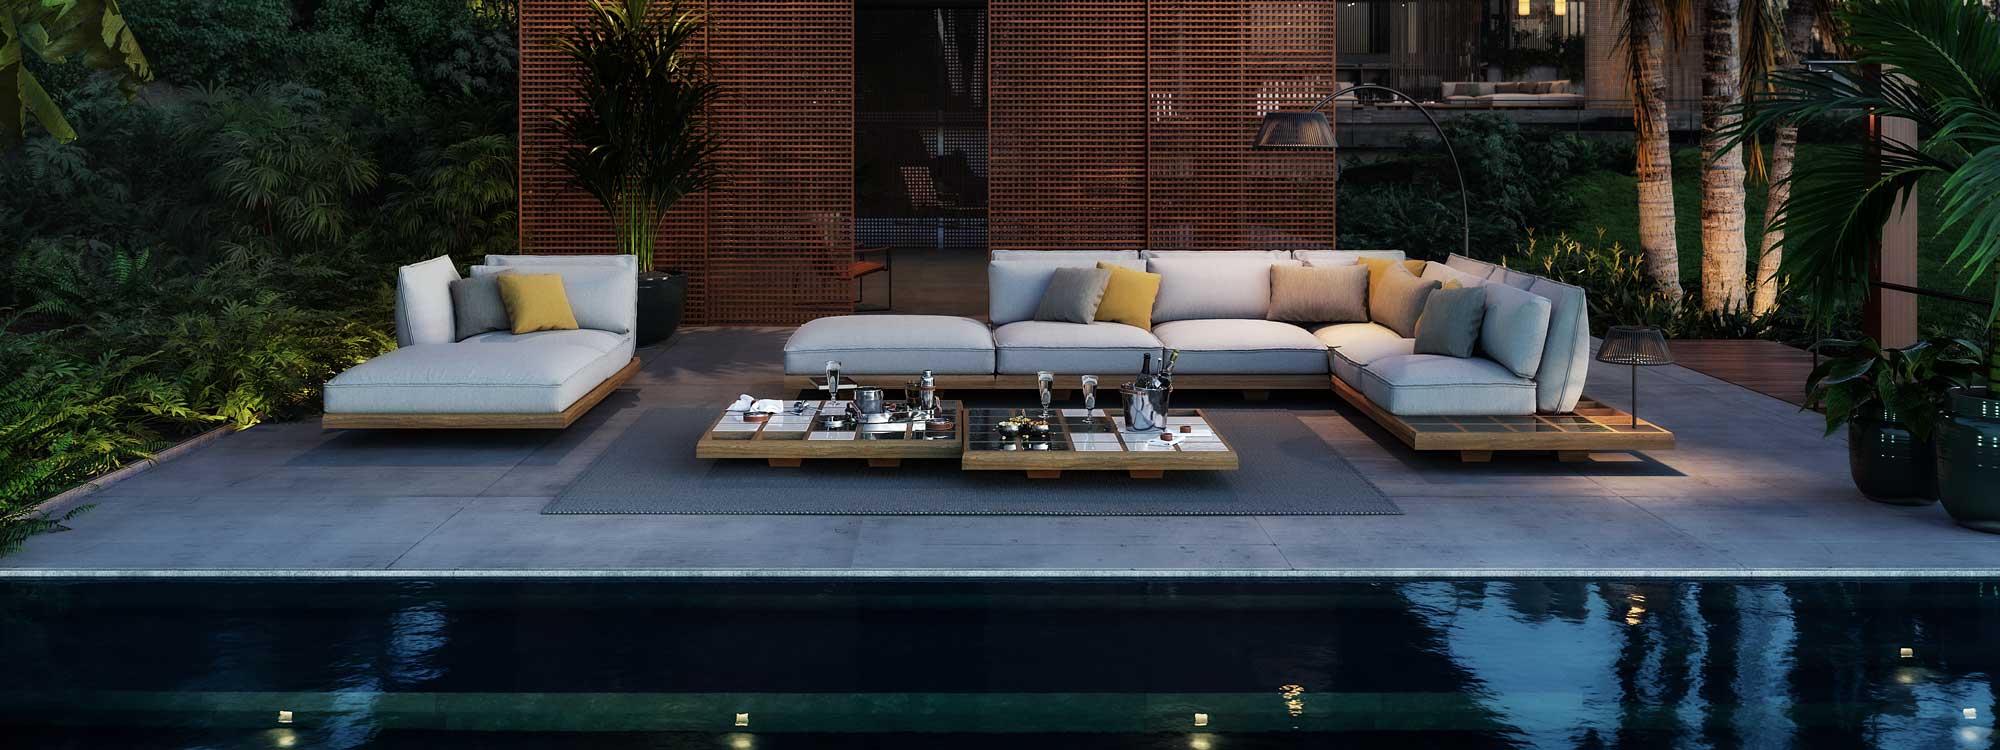 Image of Royal Botania Mozaix minimalist outdoor corner sofa and chaise longue on oriental terrace, with tranquil water feature in foreground and exotic plants and screening in the background